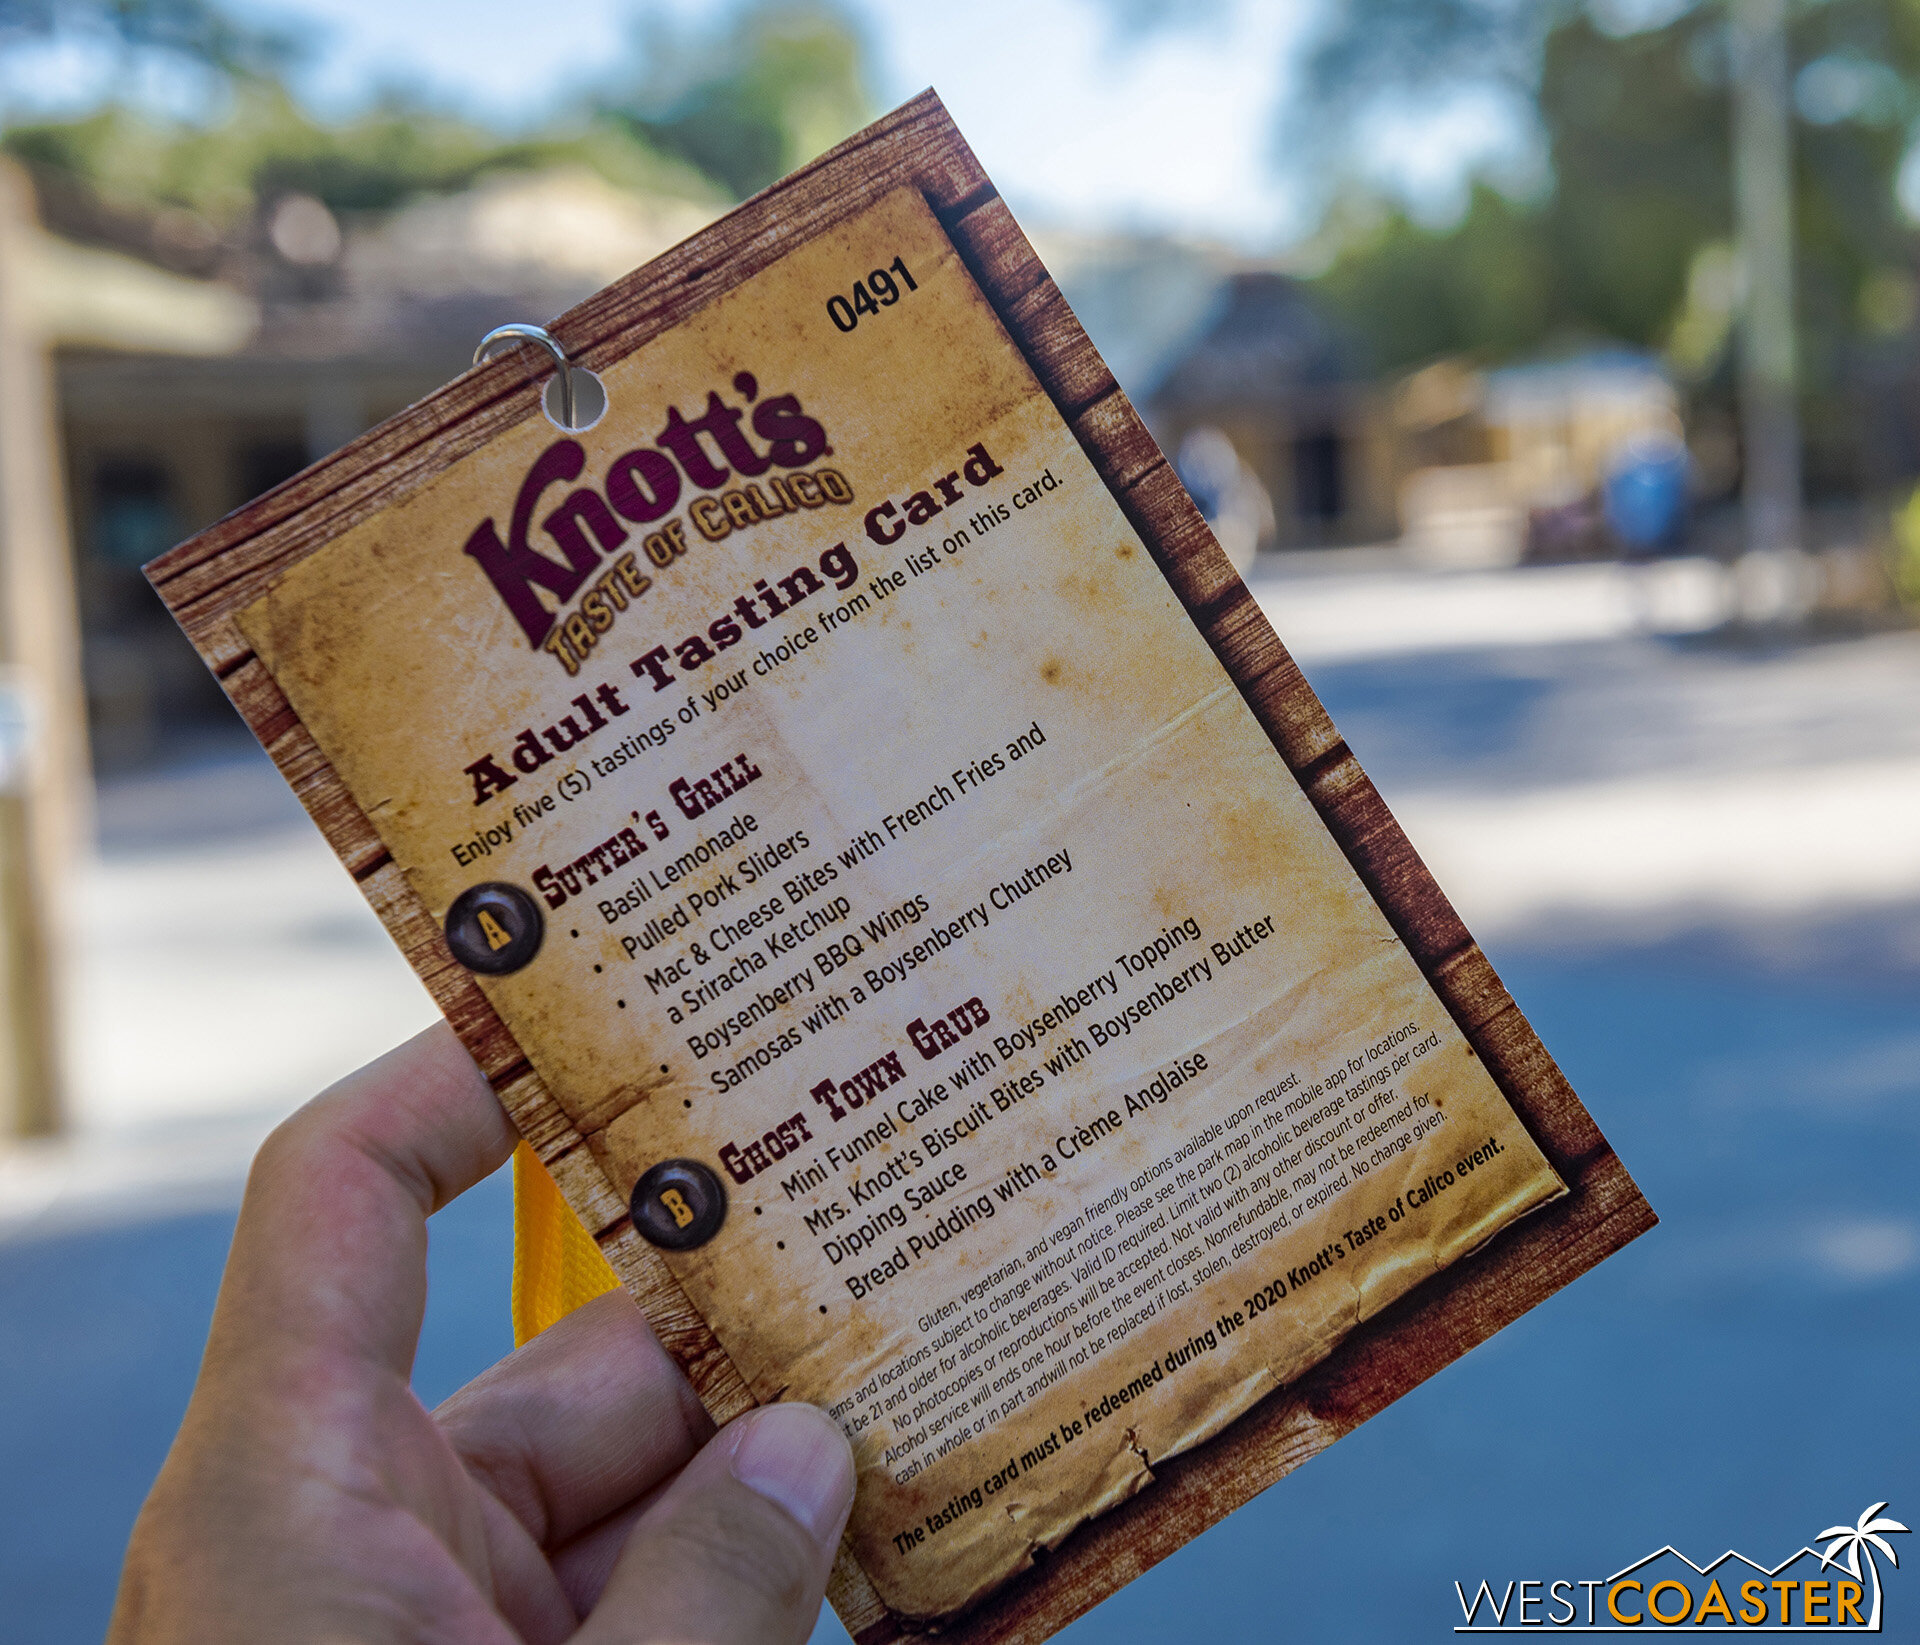  Here’s the front side of the Knott’s Taste of Calico tasting card. 